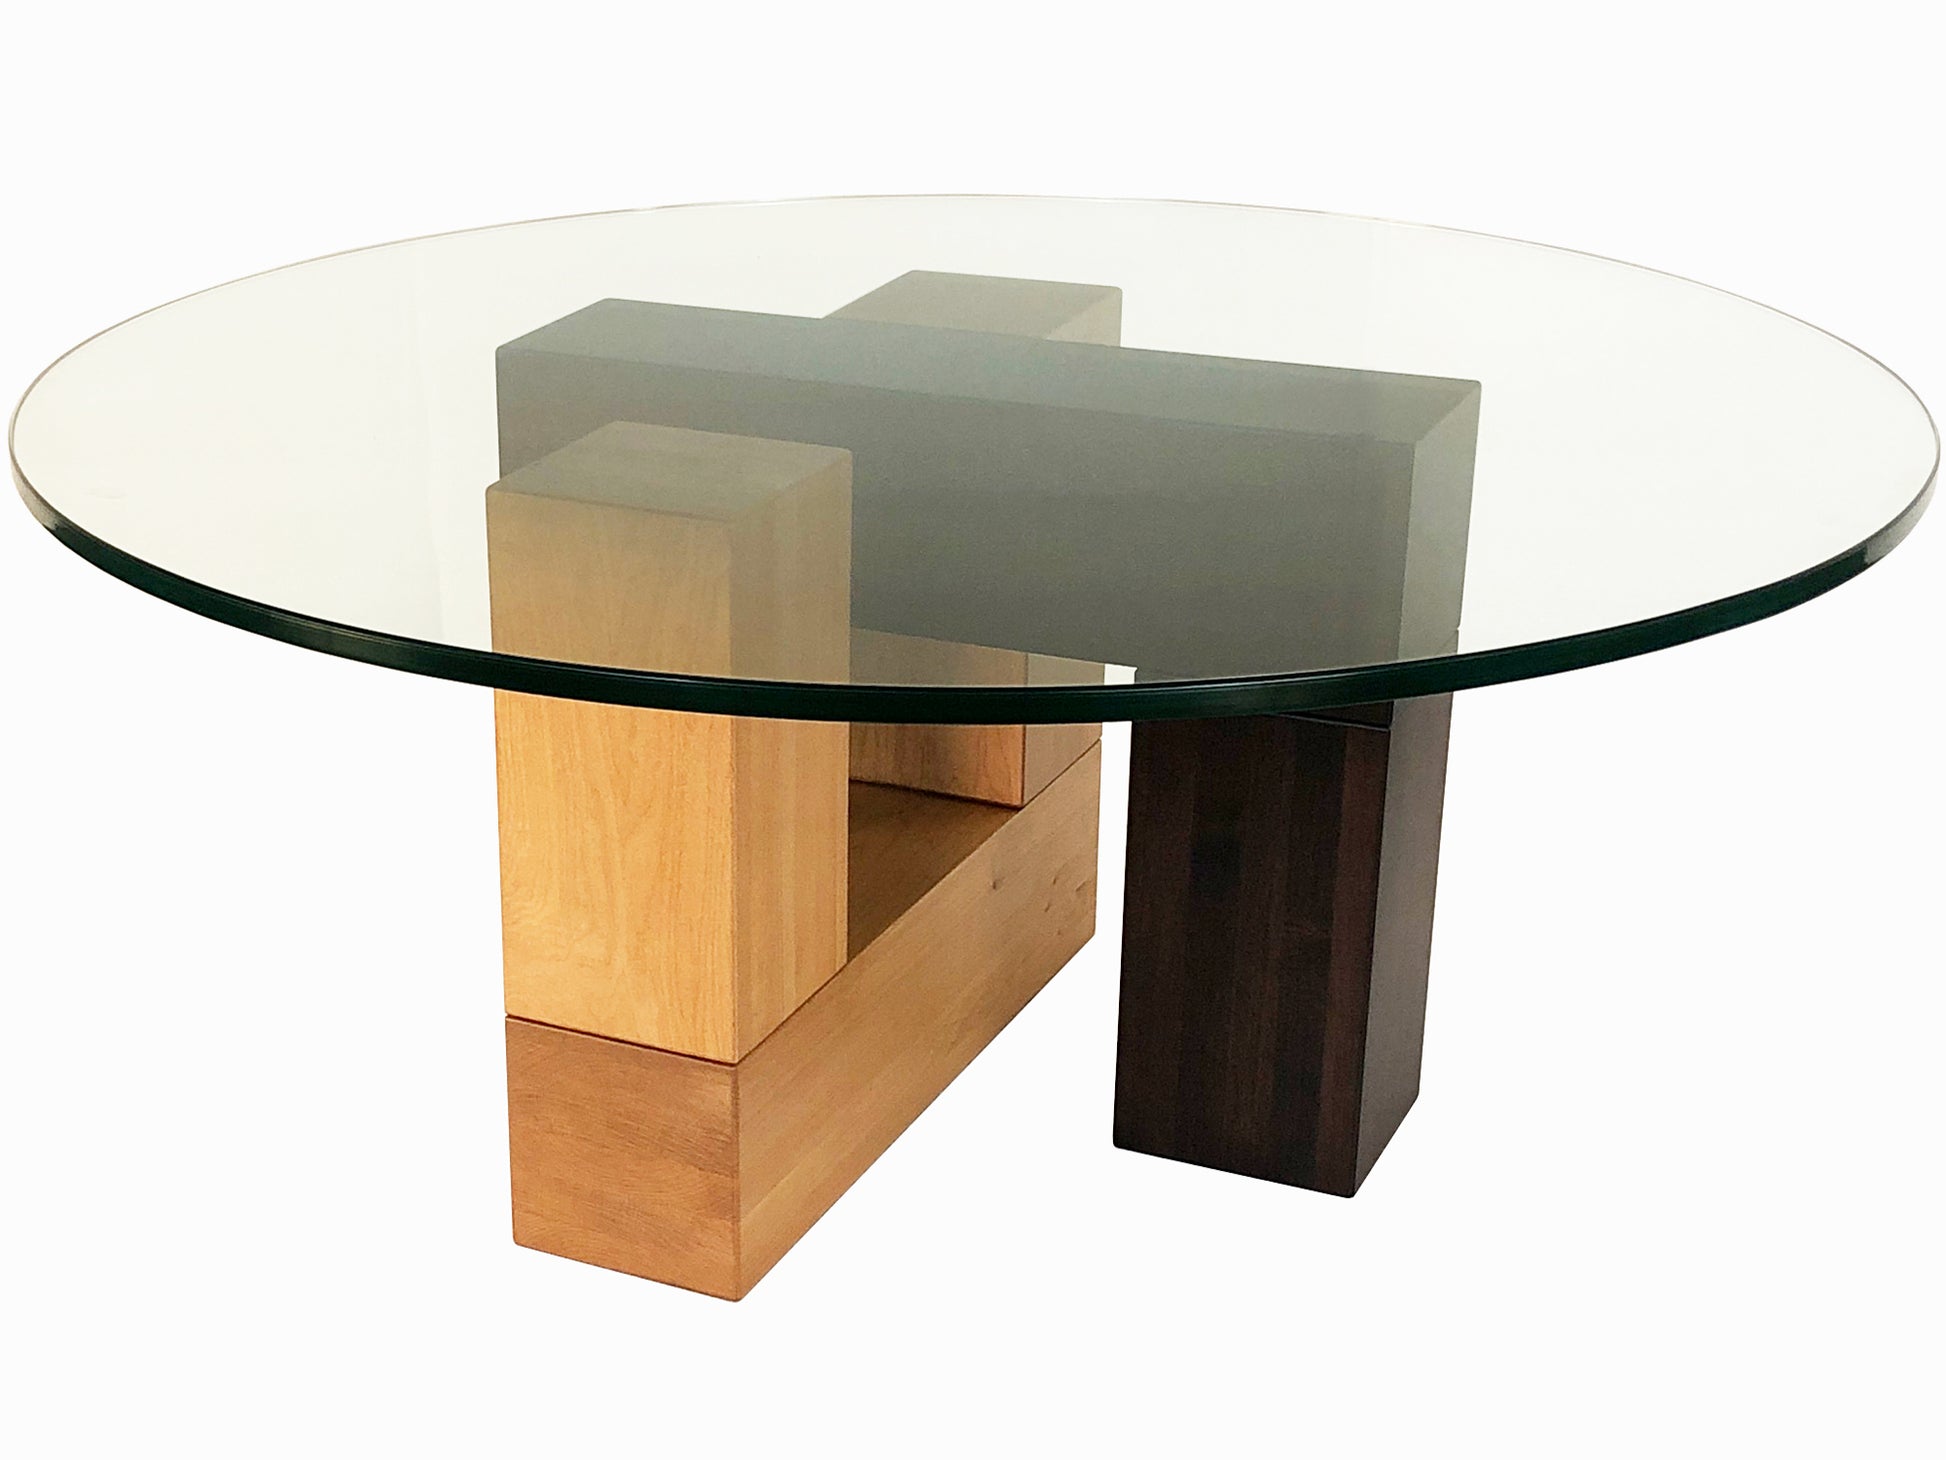 Tangent Round Coffee Table - alternative configuration - see video